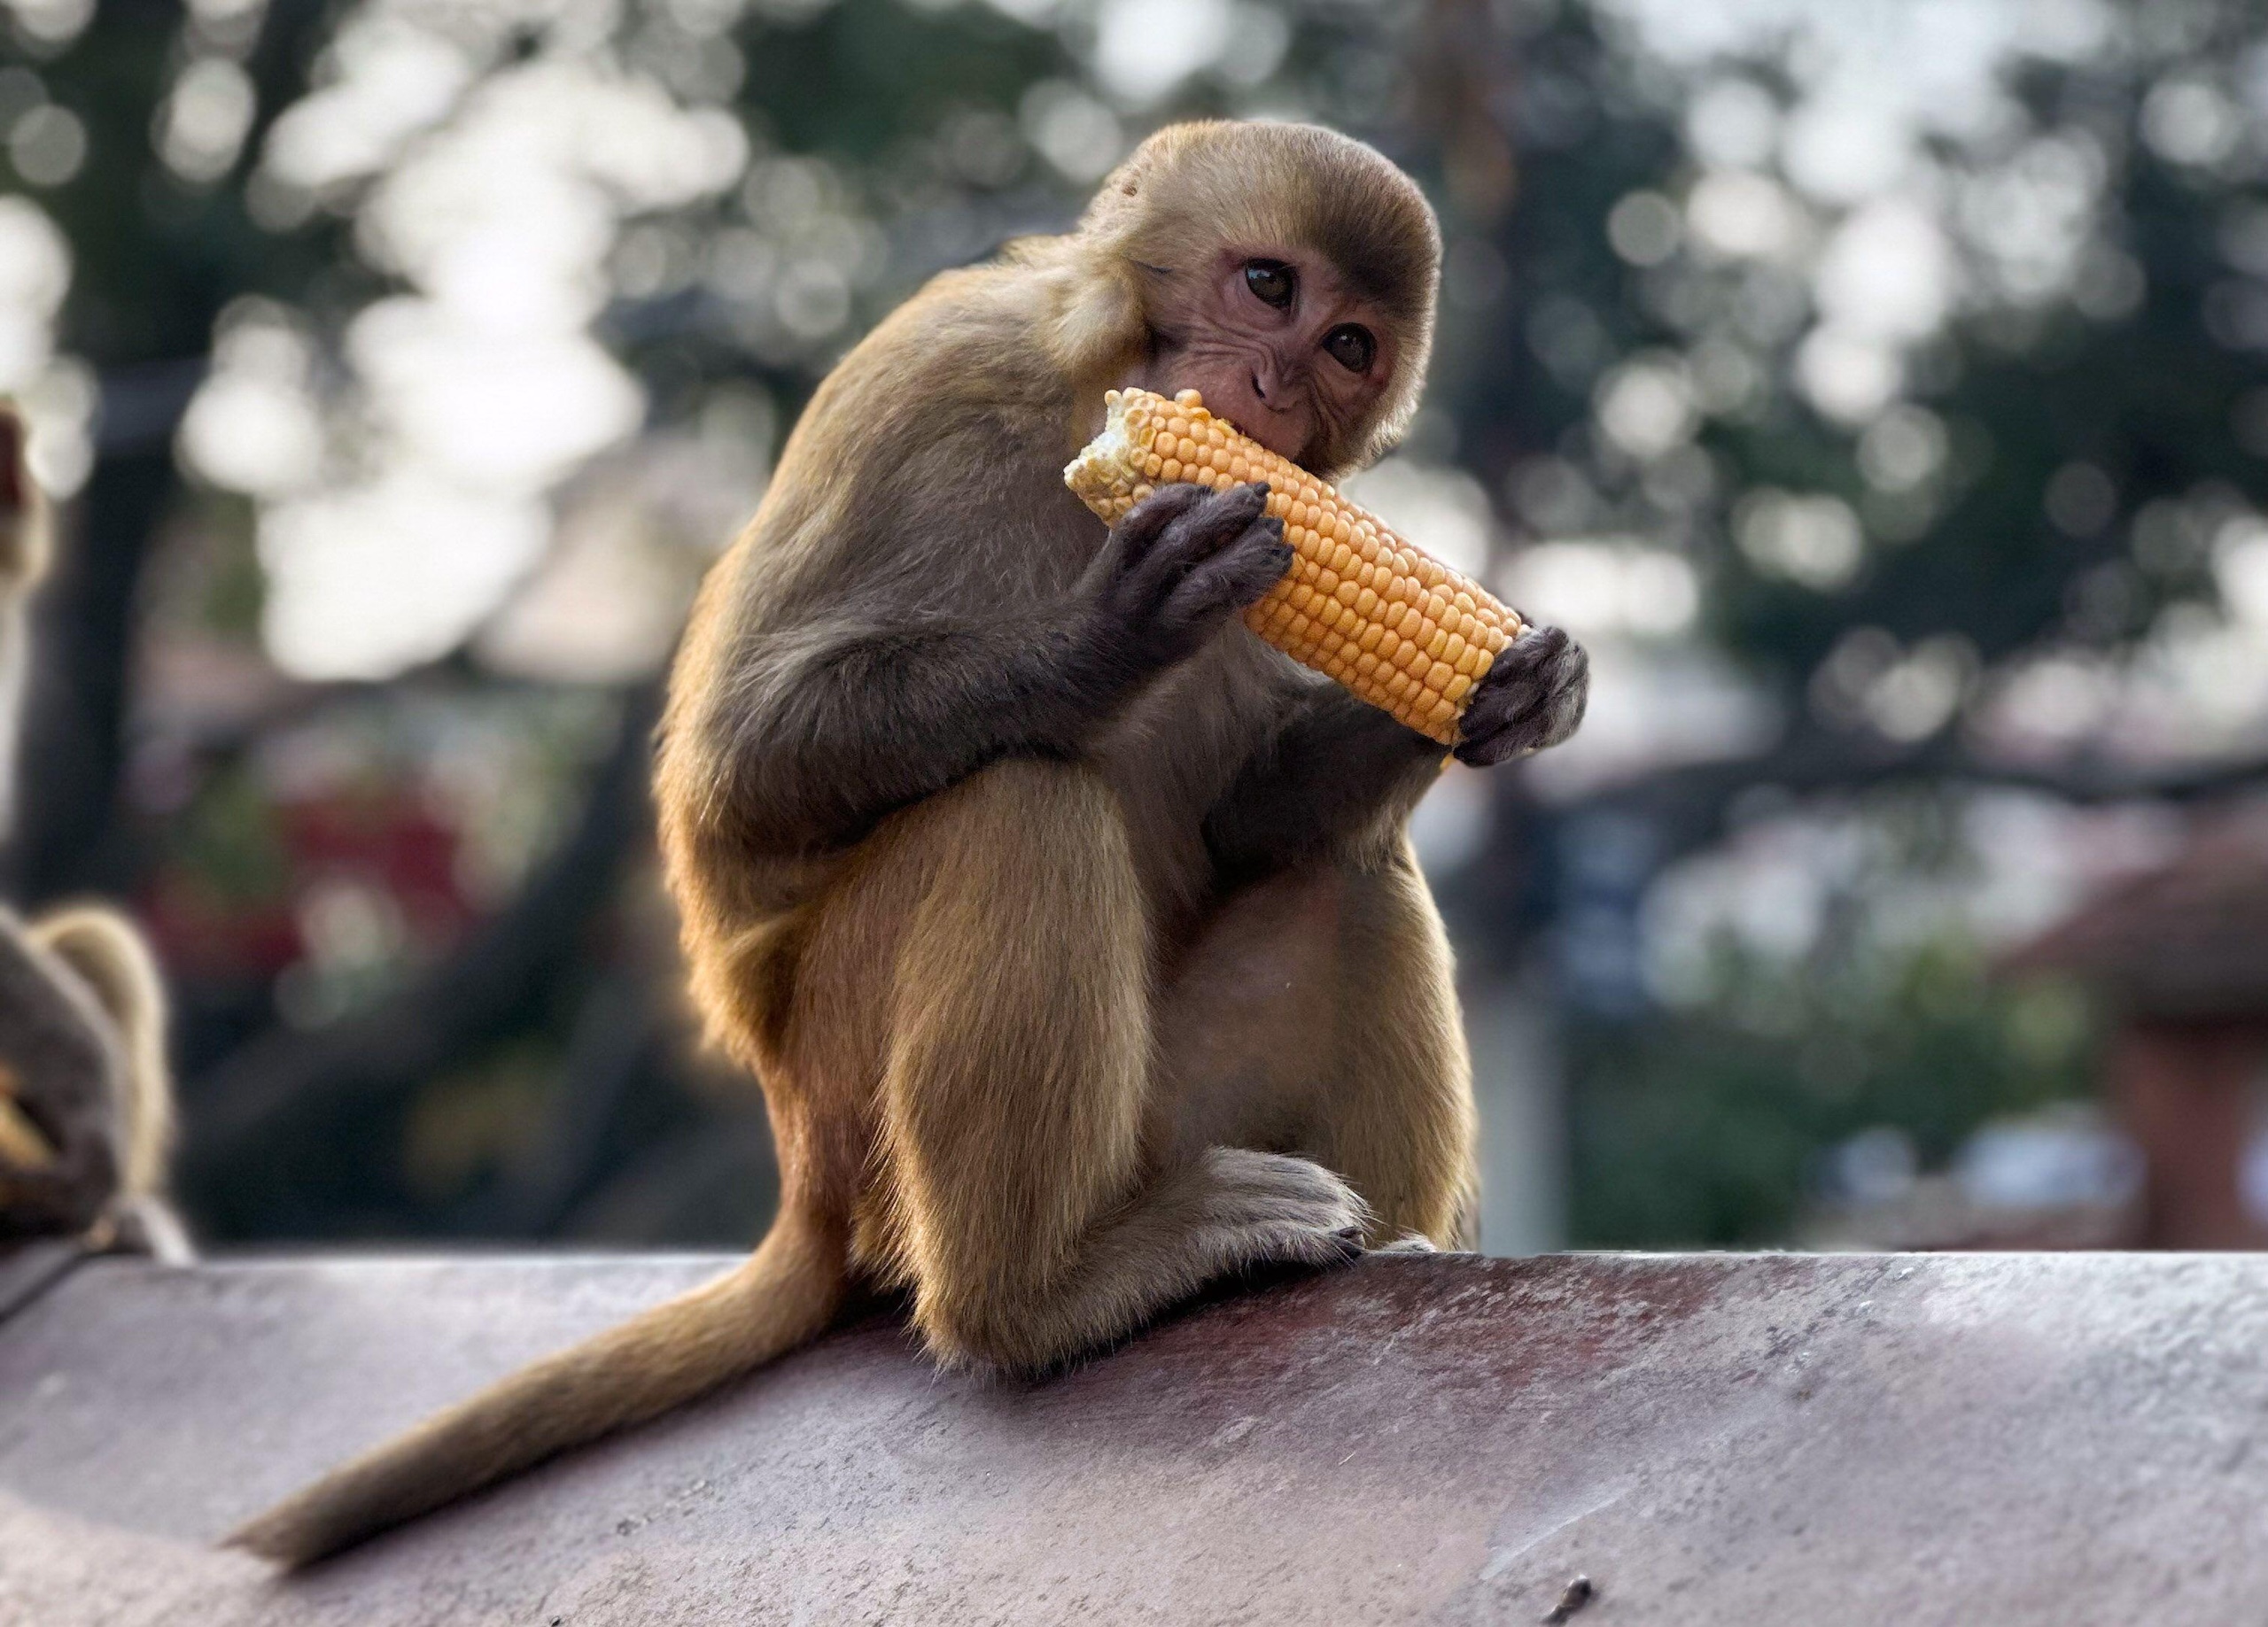 <p>Nepal’s rhesus macaques love maize and other crops, but their foraging means that poor farmers are losing much-needed income (Image: Alamy)</p>